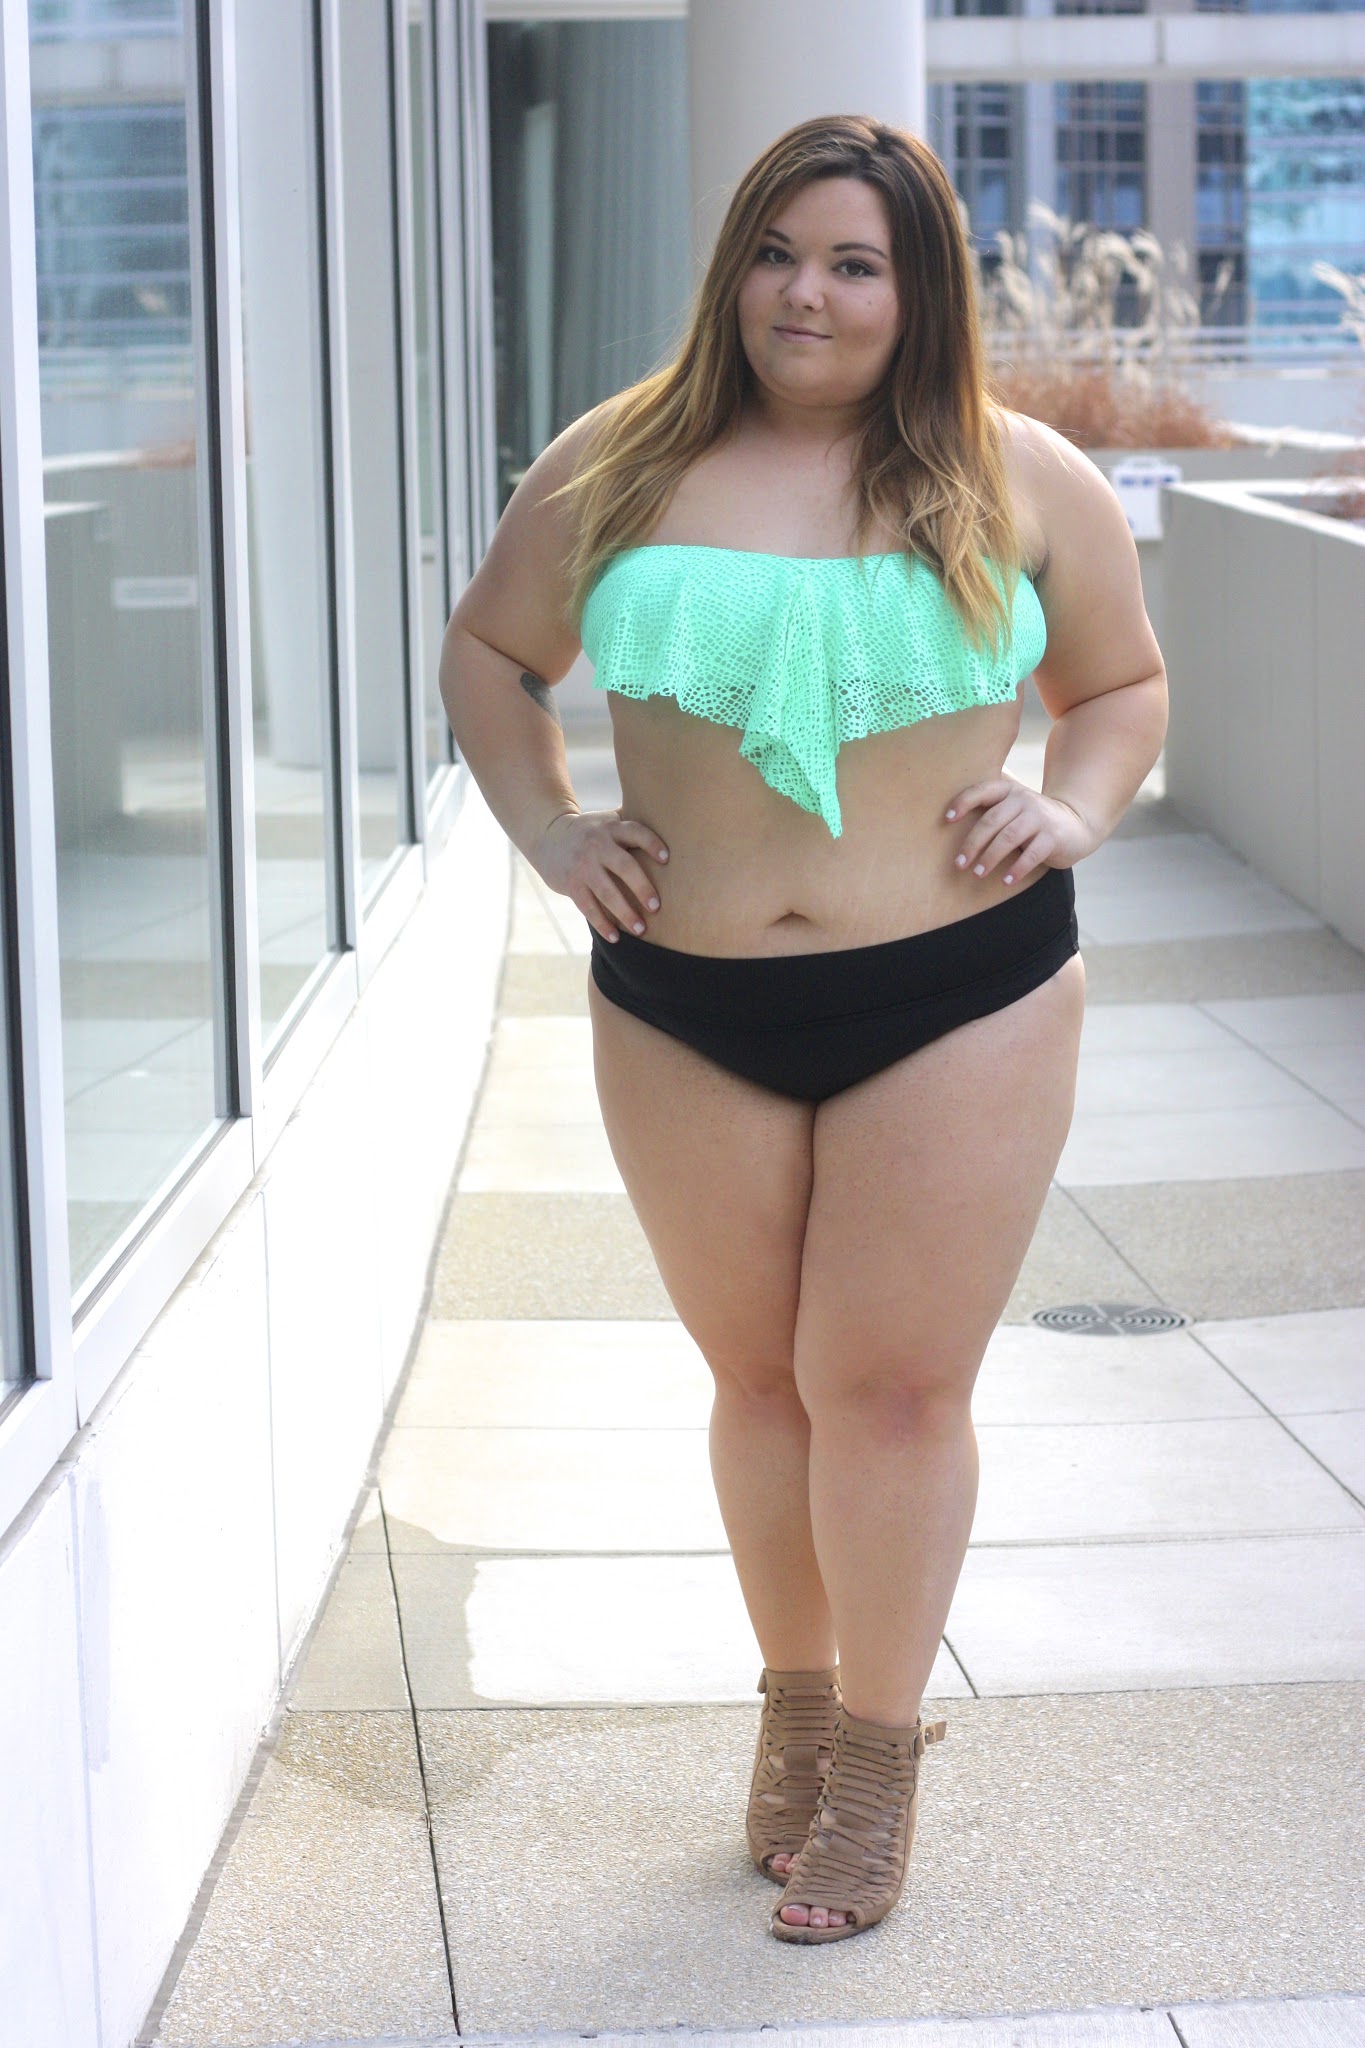 Petite and plus size fashion blogger Natalie in the city shares her favorite target bikinis and one pieces and talks about body confidence.